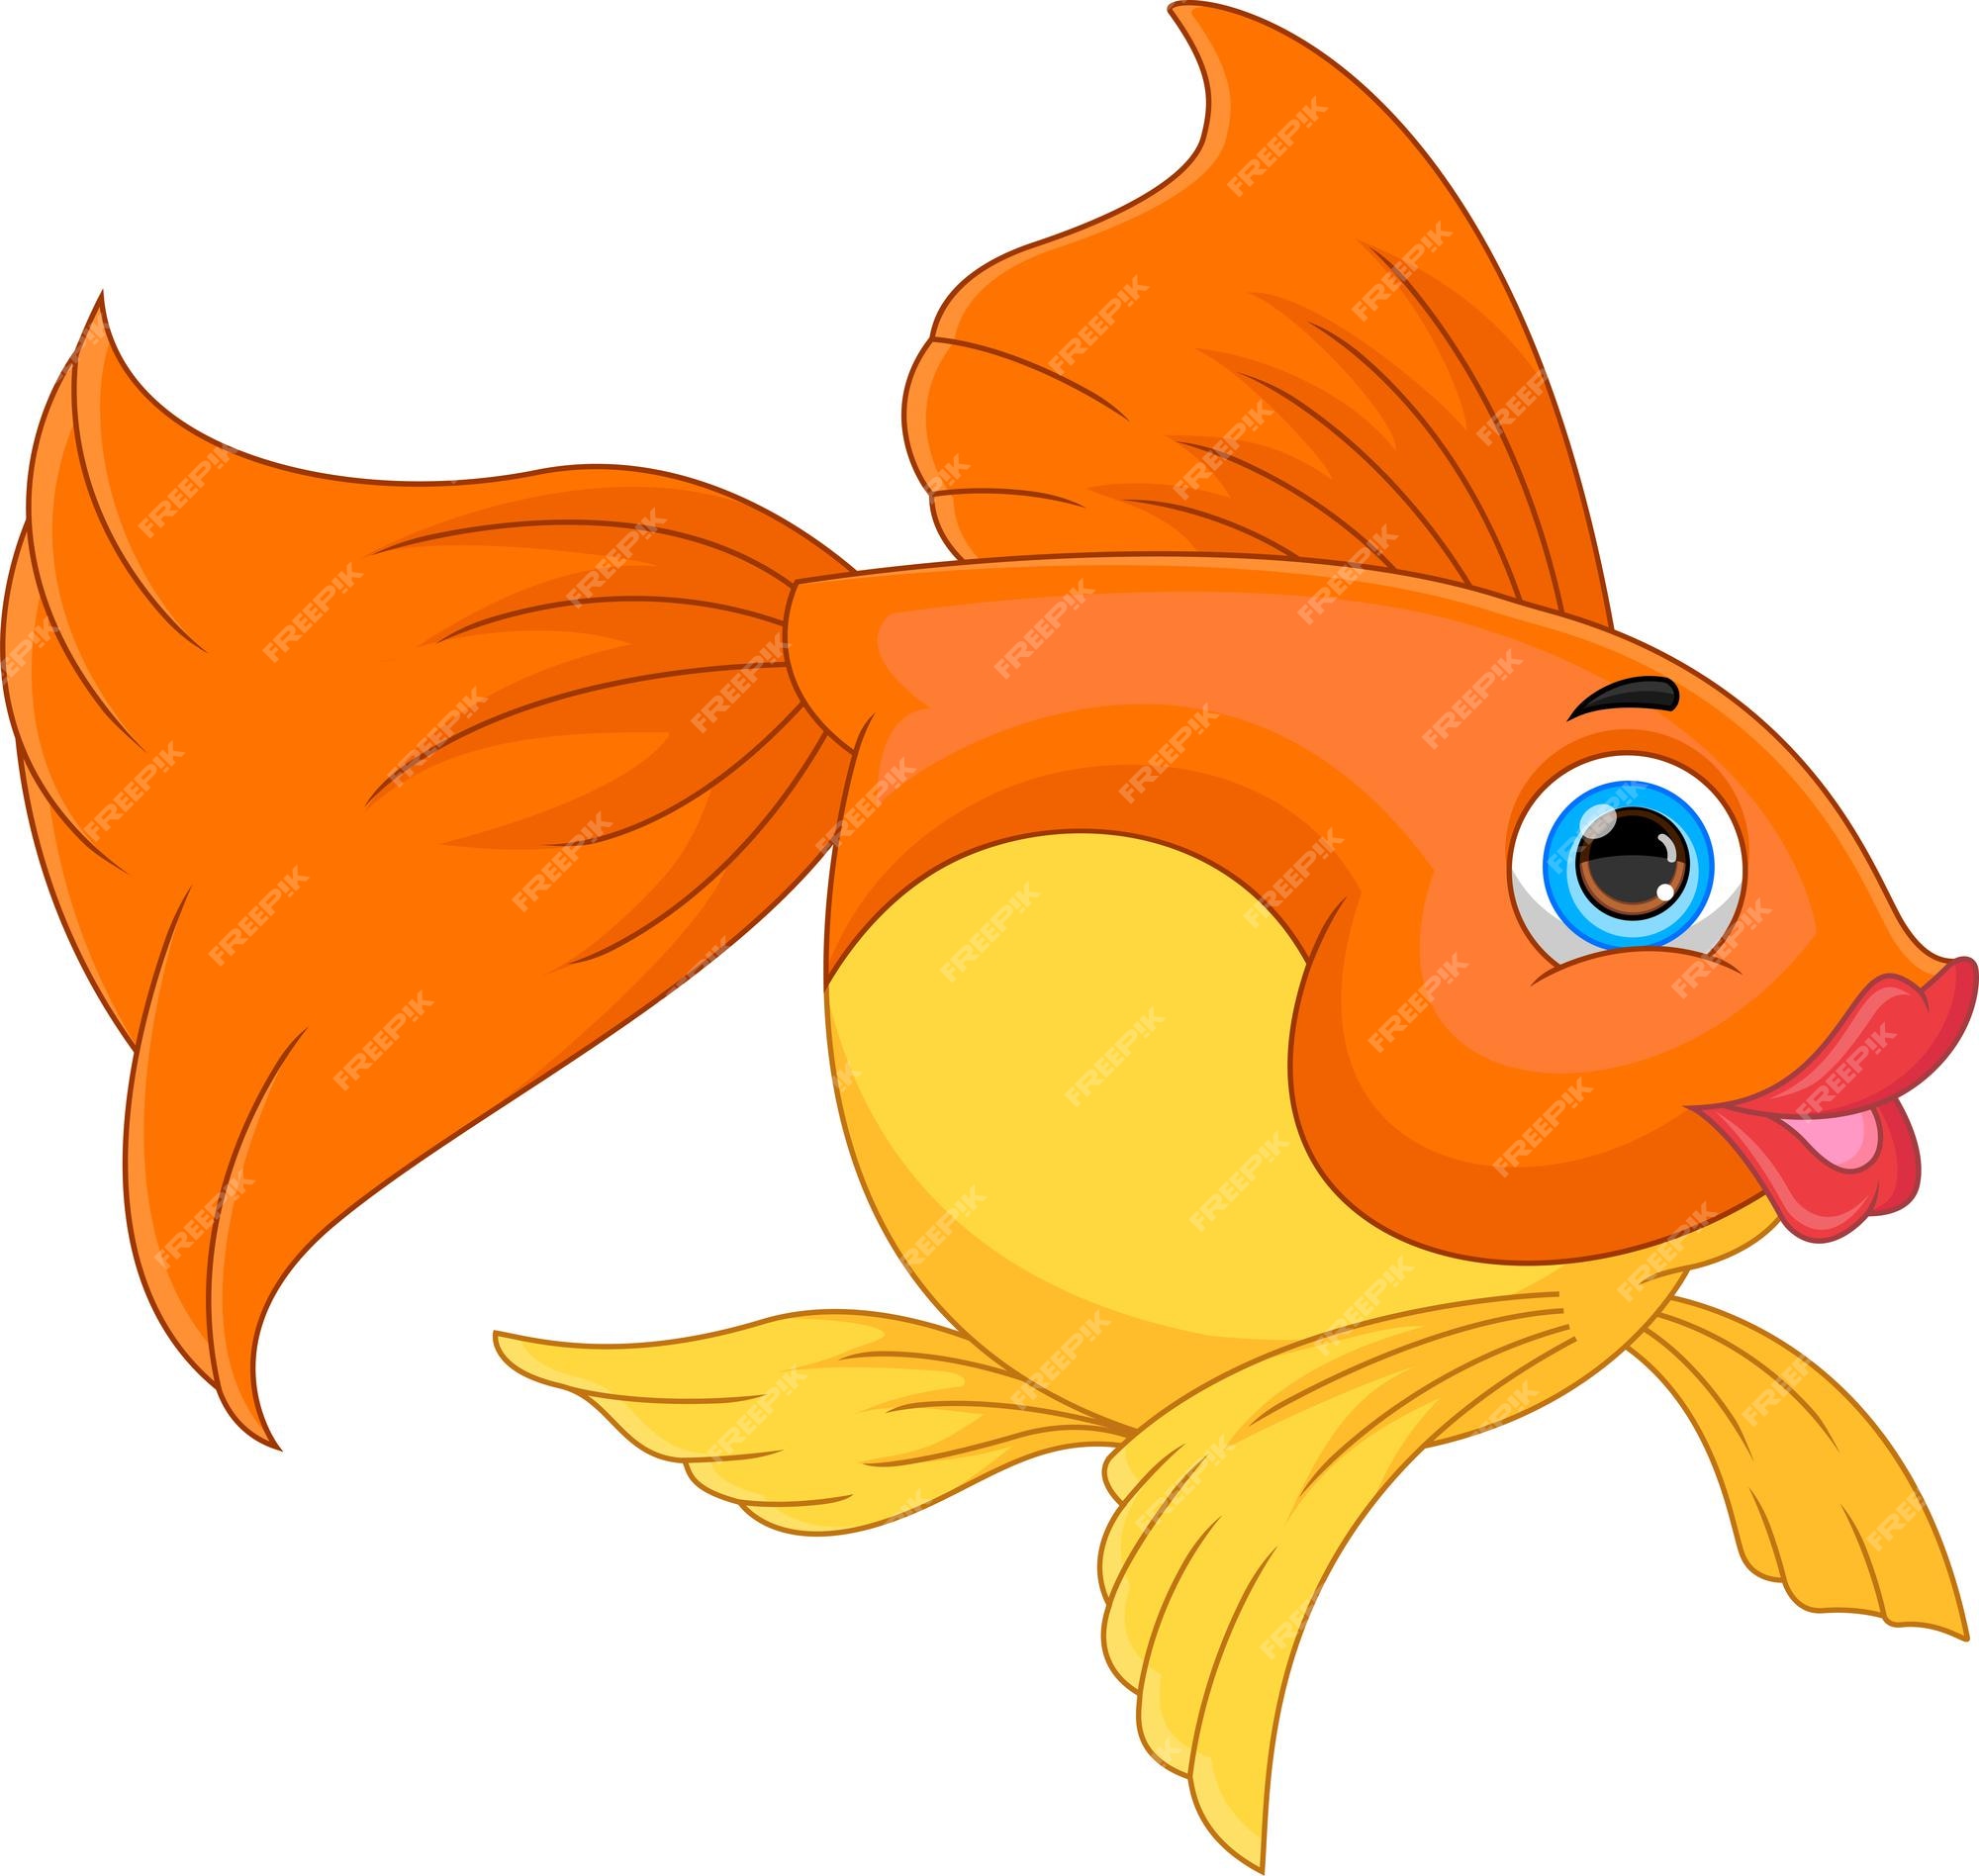 Premium Vector | Cartoon cute fish isolated on white background